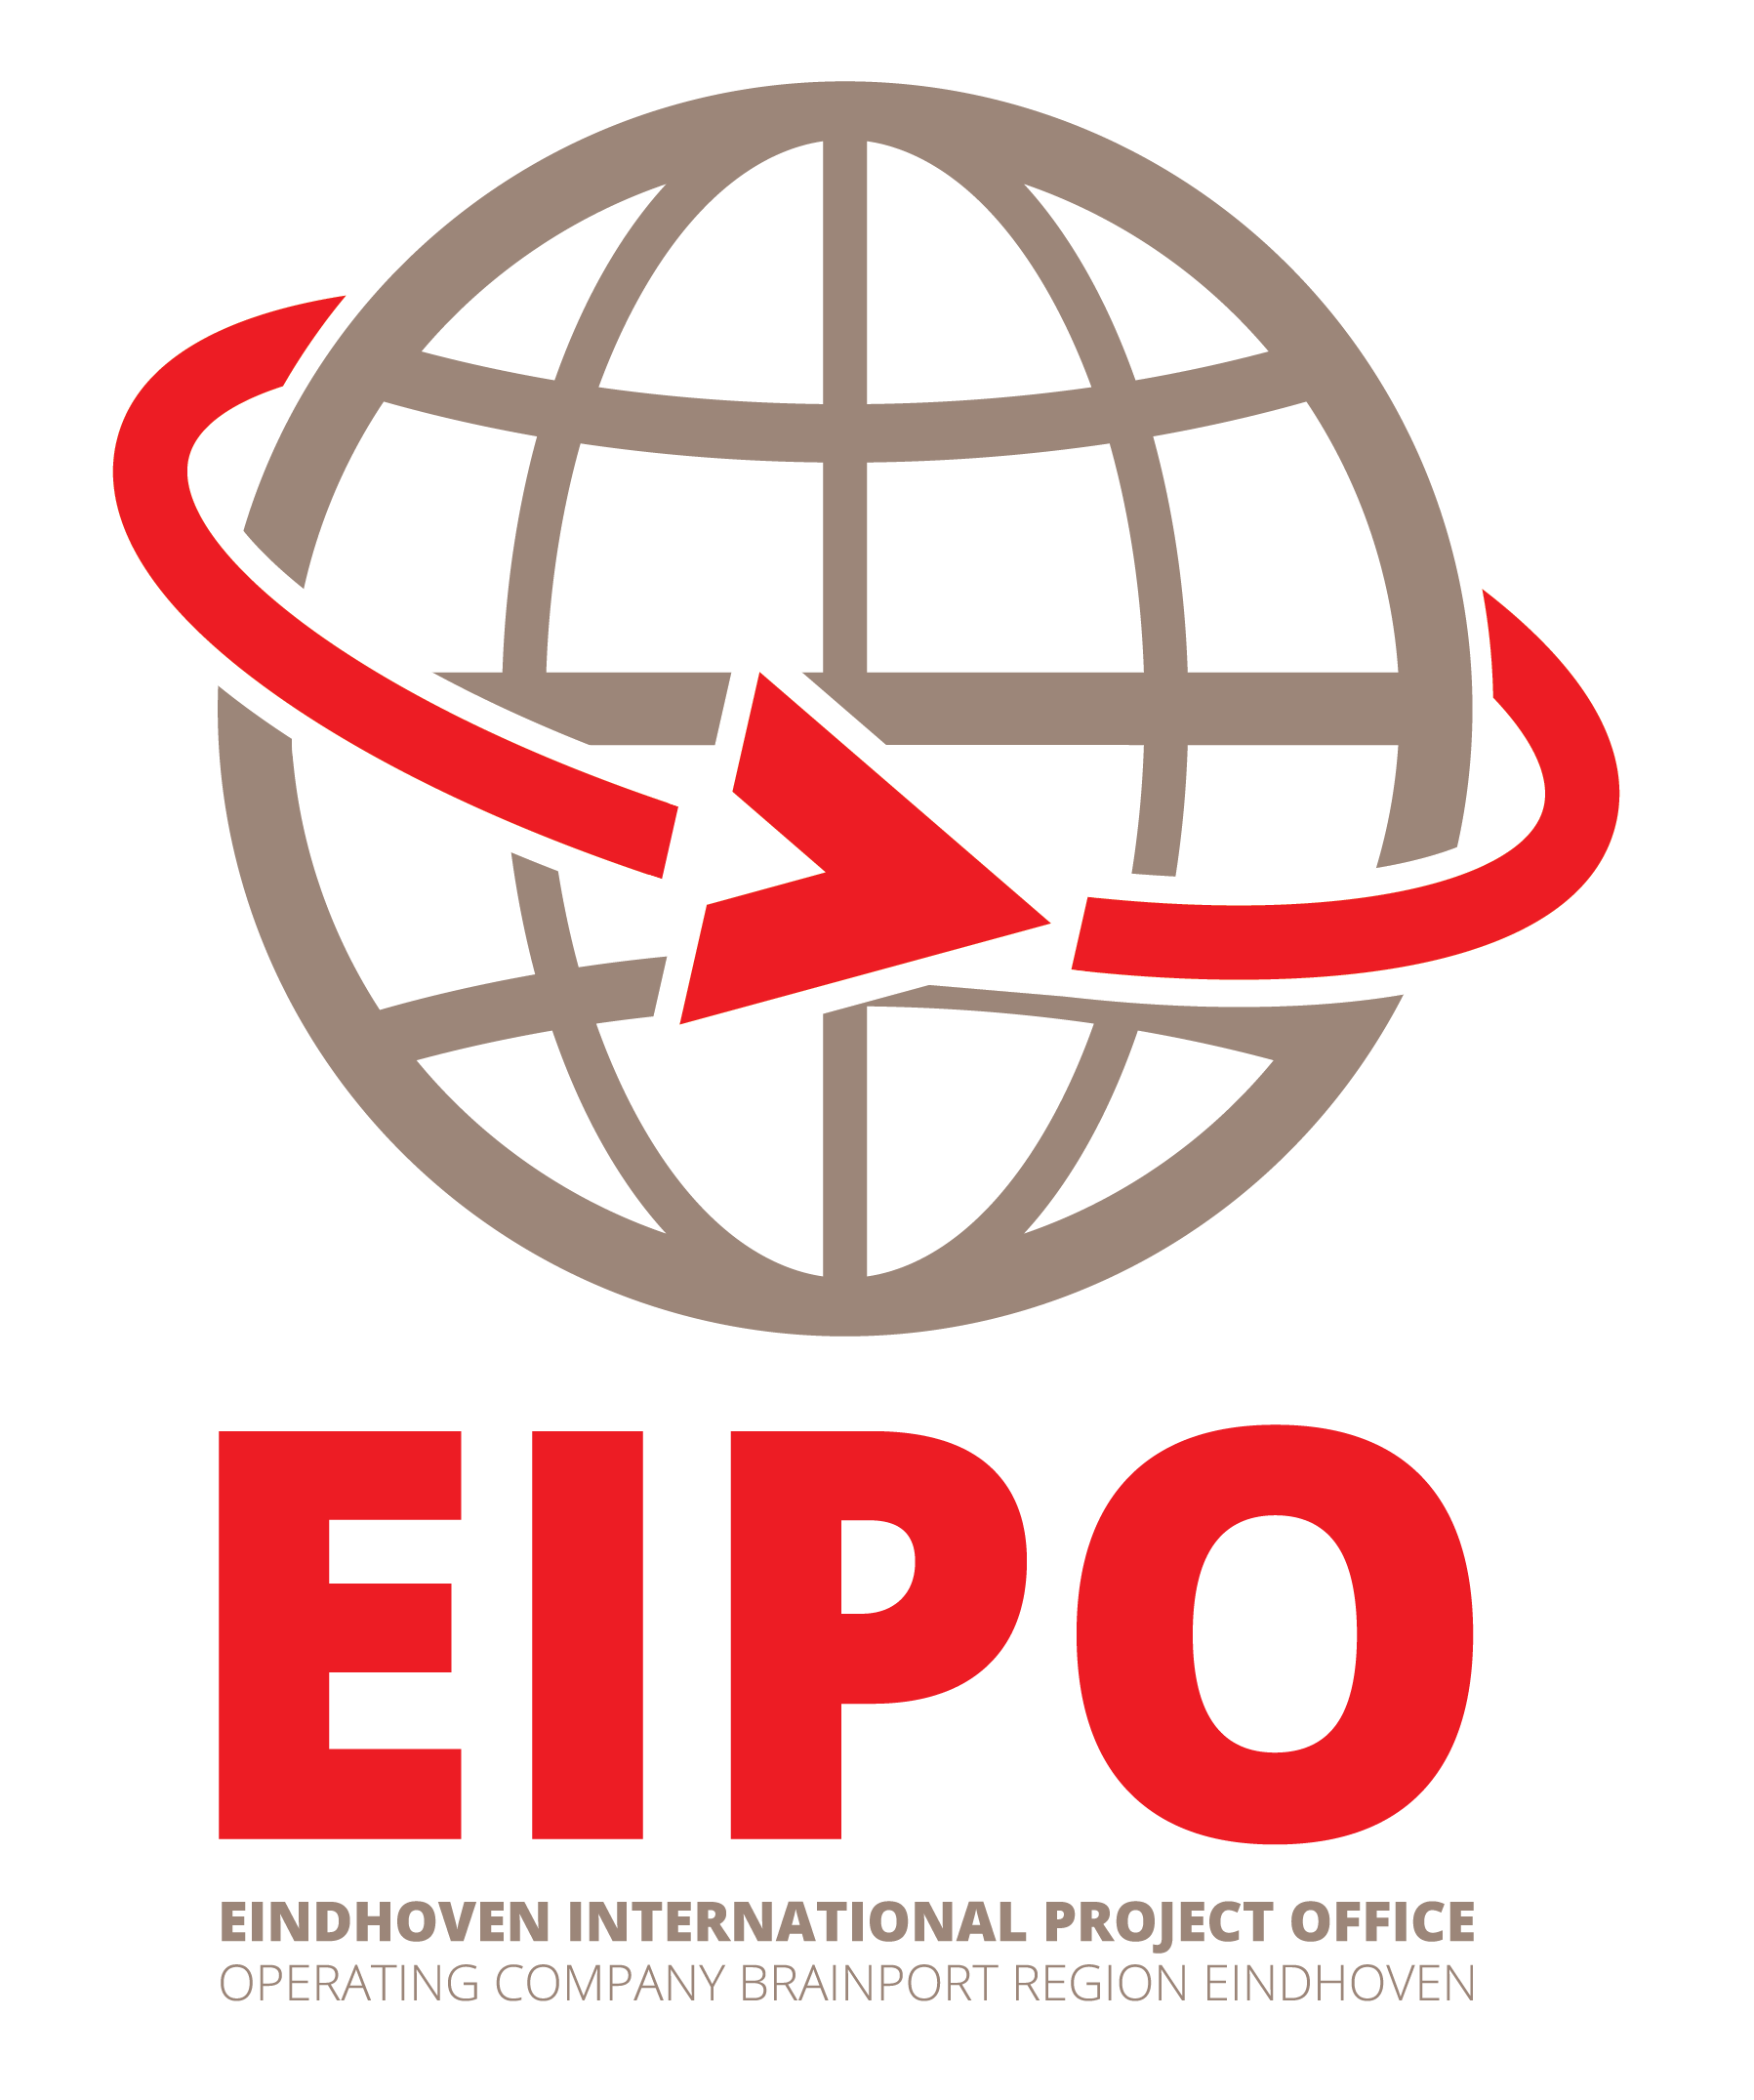 EIPO (Eindhoven International Project Office) BV